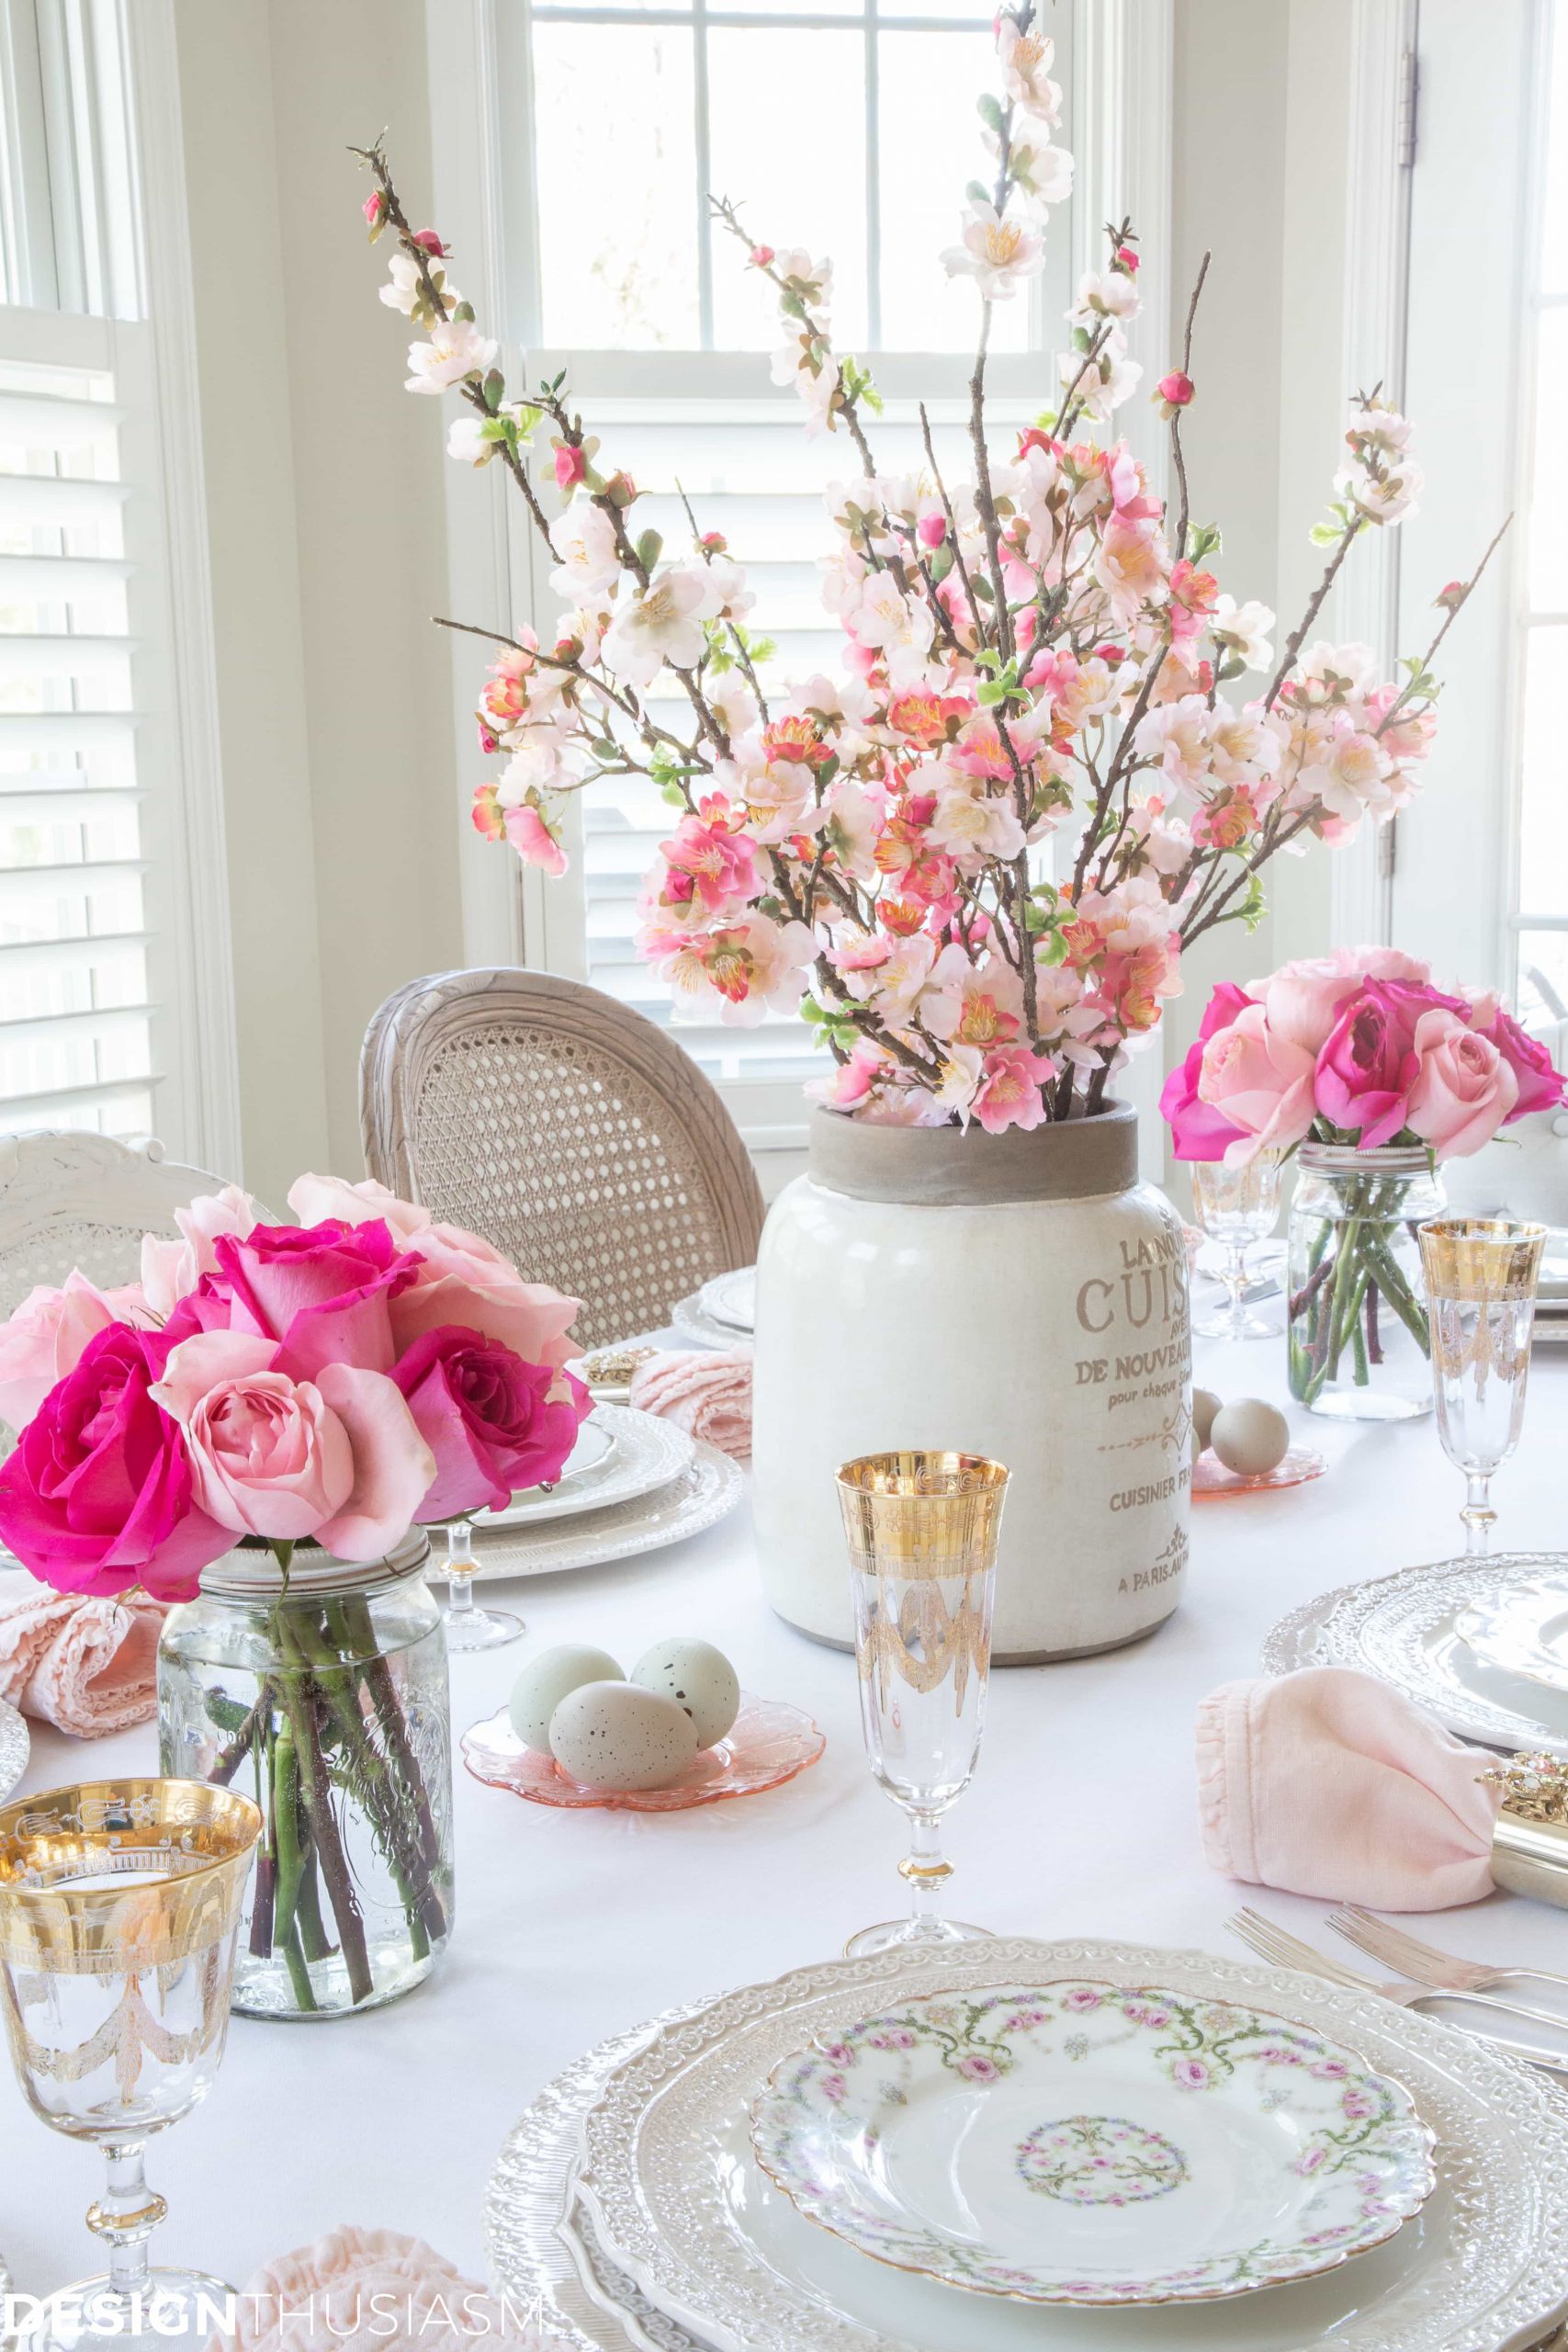 Easter Table Decor
 Easter Ideas Using Blush Pink in Your Easter Table Decor